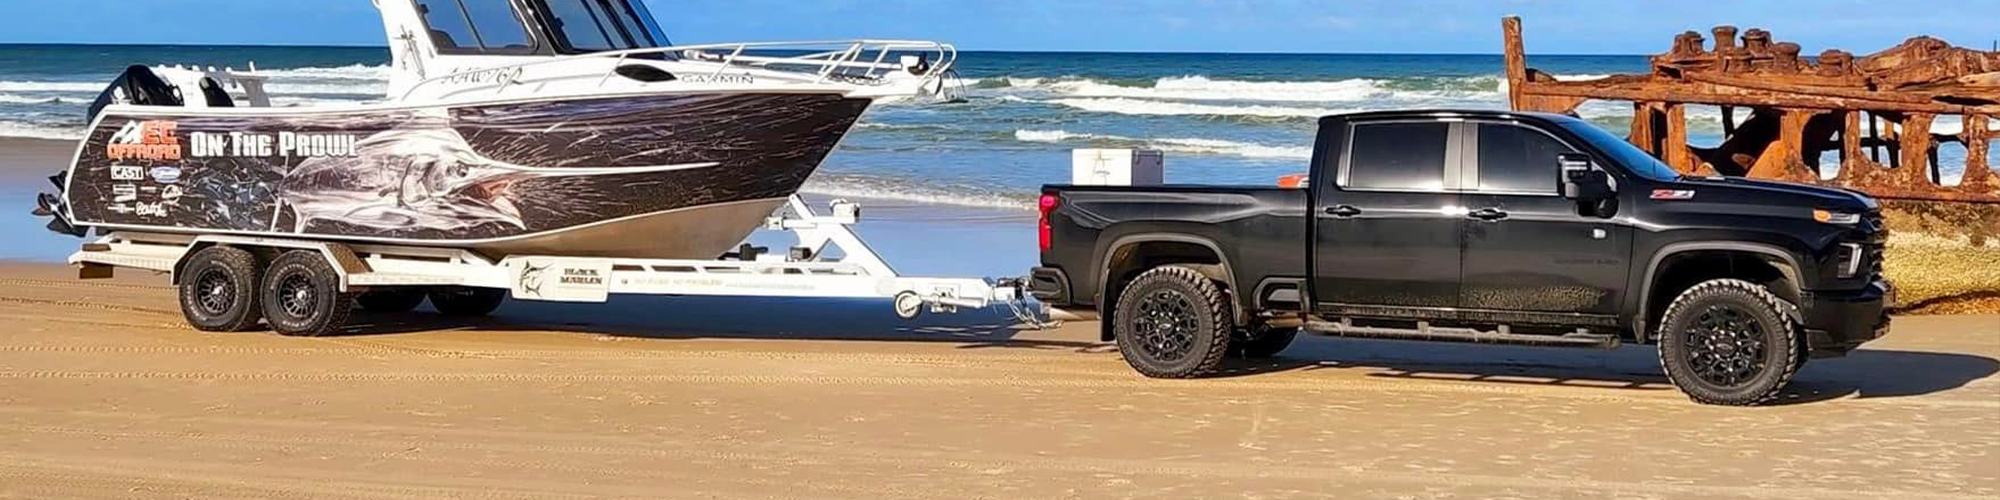 Gen-Y Hitch - Towing Boat on the Beach